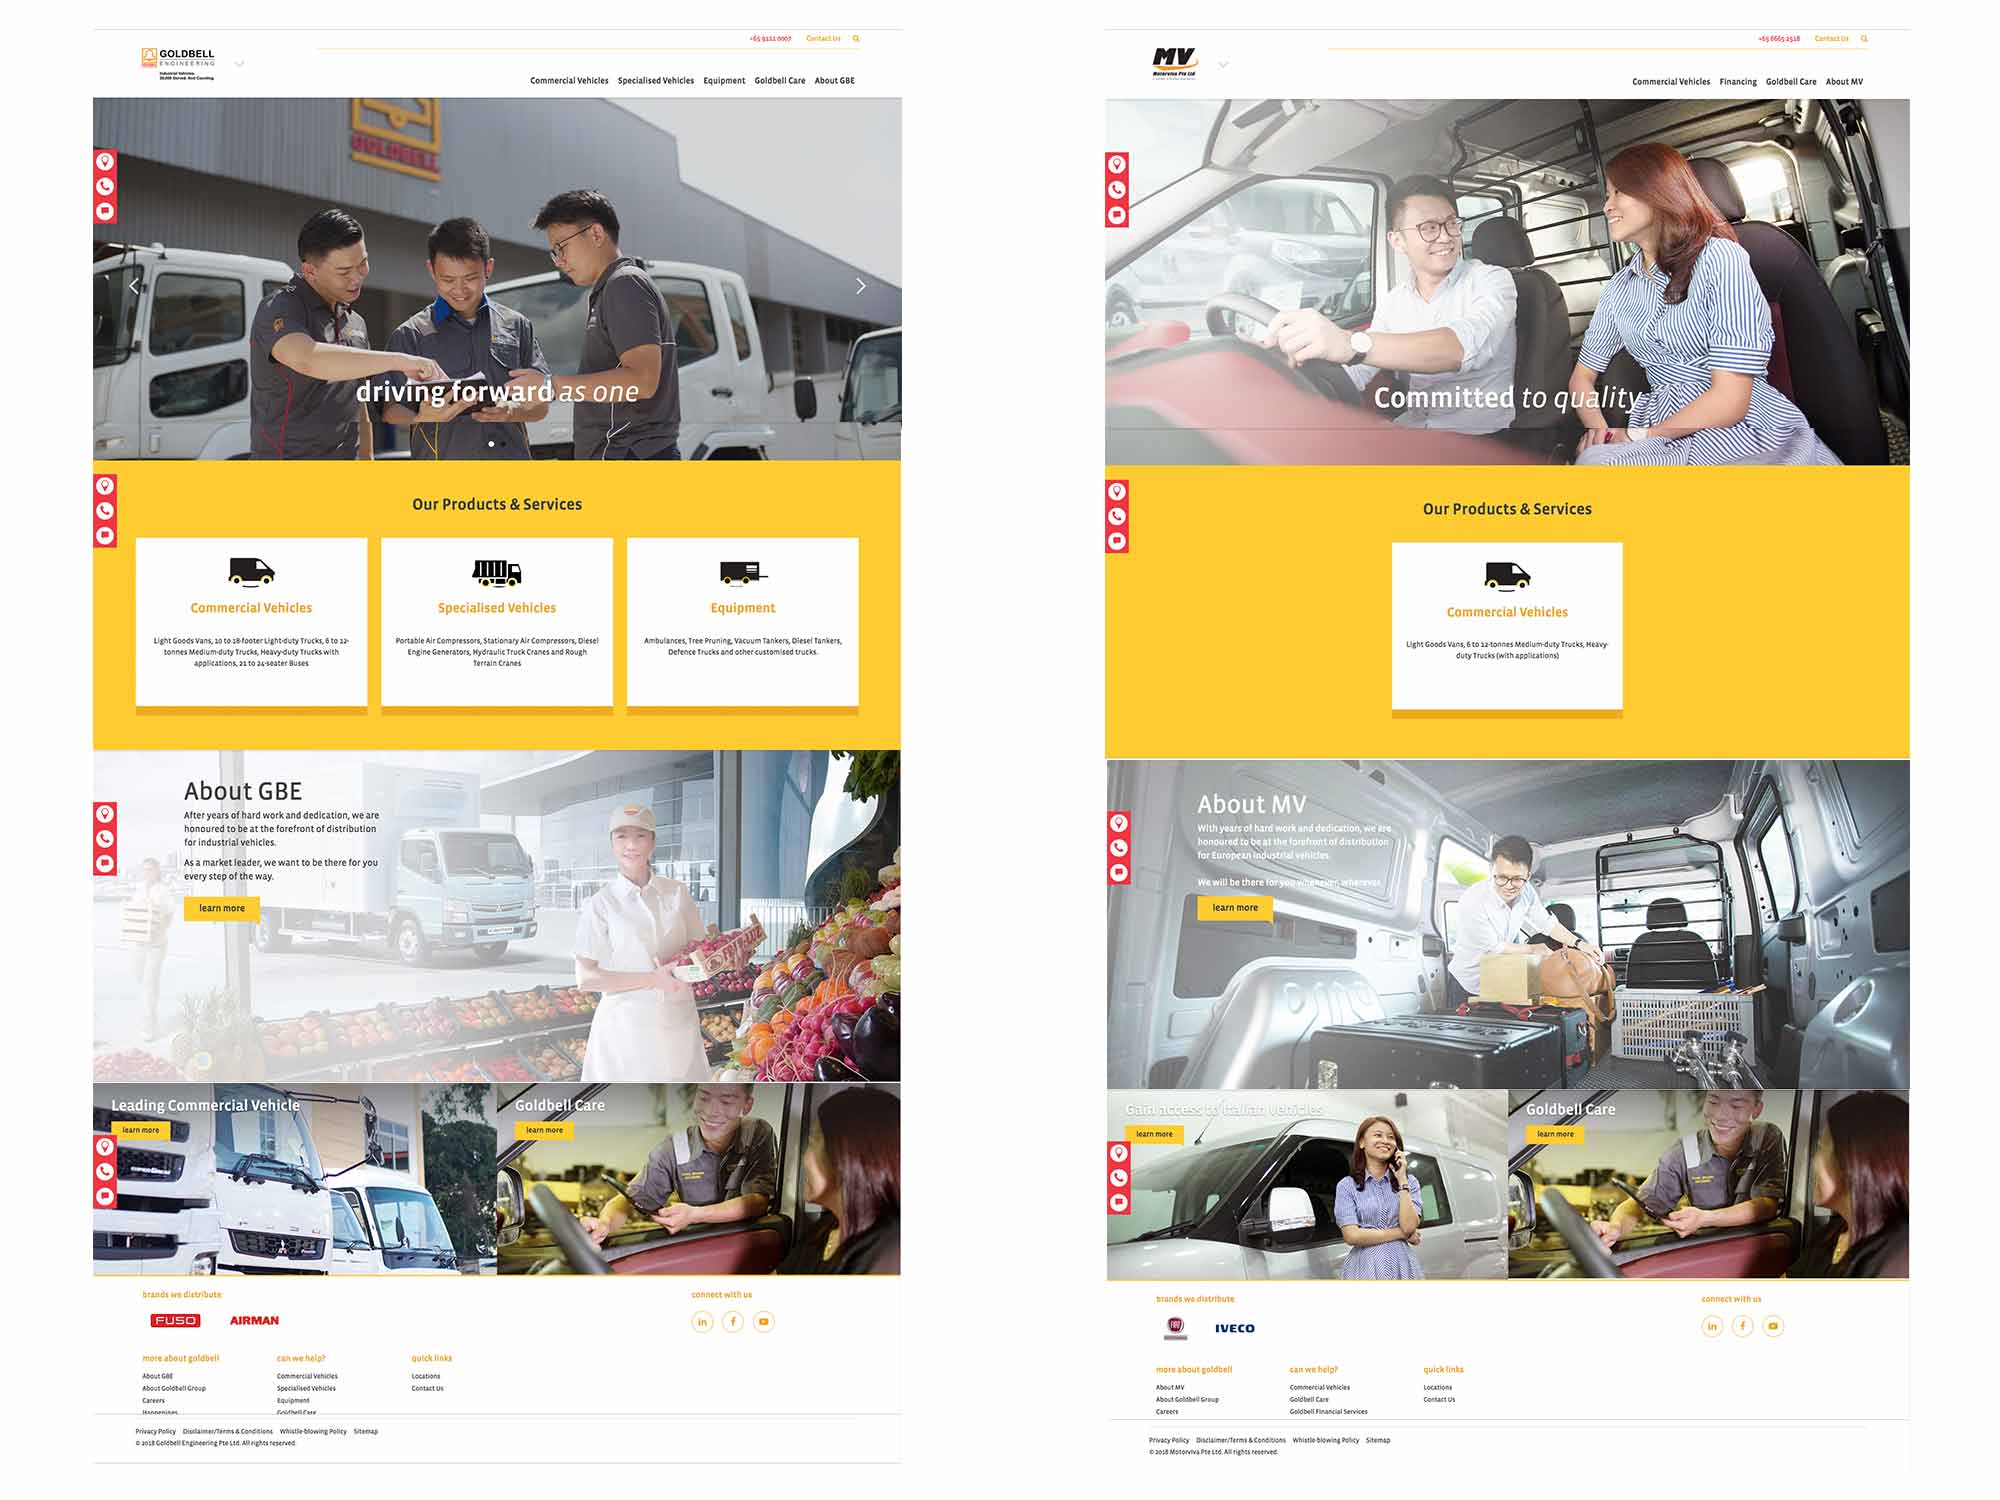 Brand Consultancy in Automotive Industry. Website design for Goldbell.